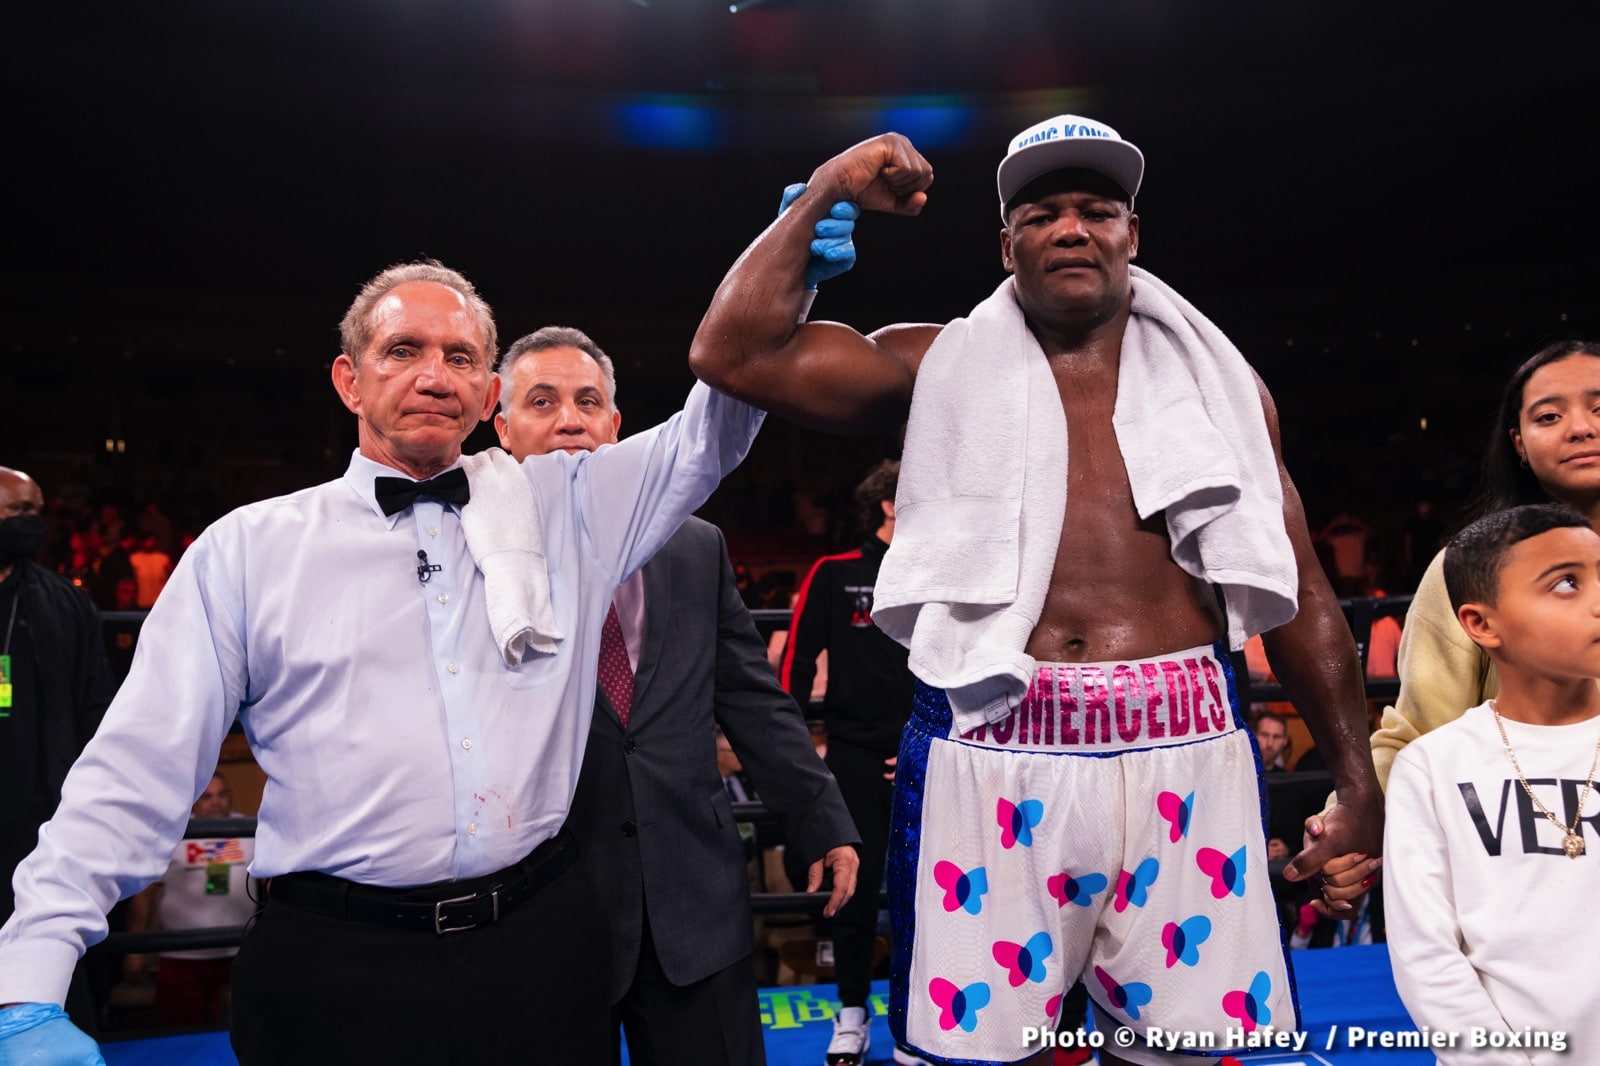 Image: Luis King Kong Ortiz Stops Prince Charles Martin in 6 rounds! - Boxing Results